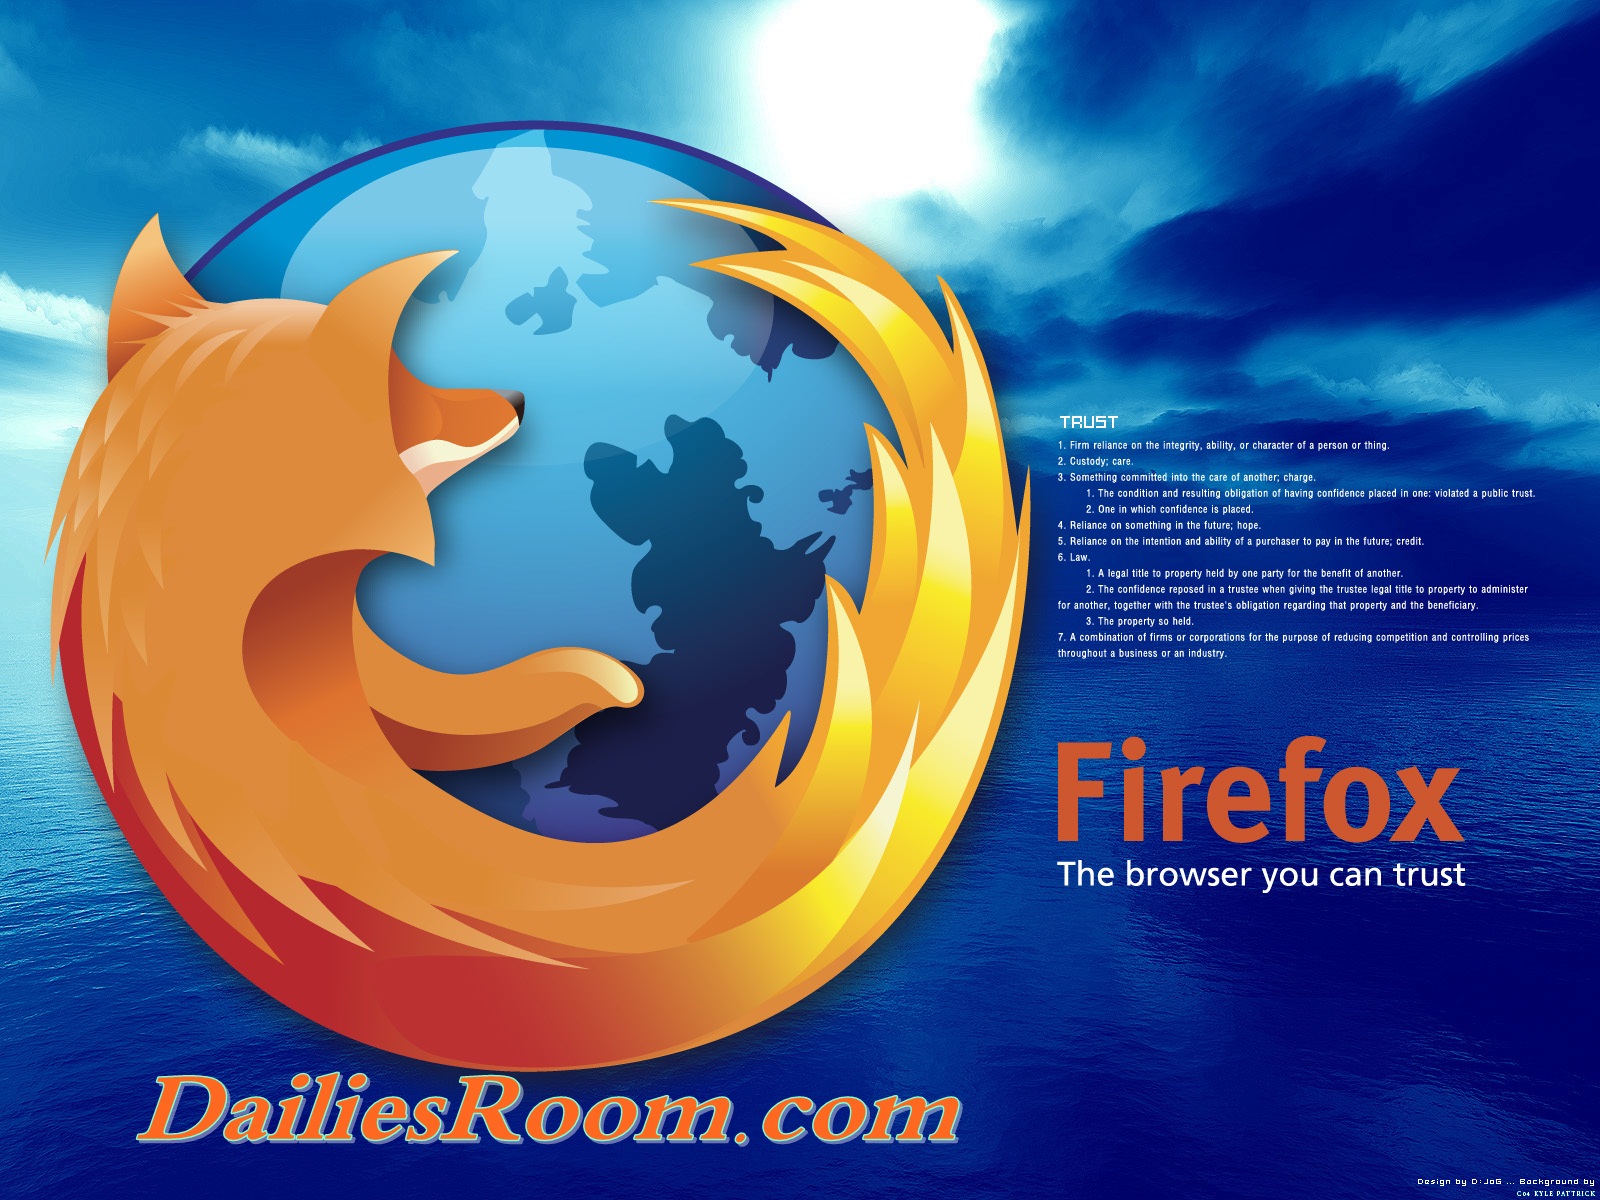 install a previous version of firefox